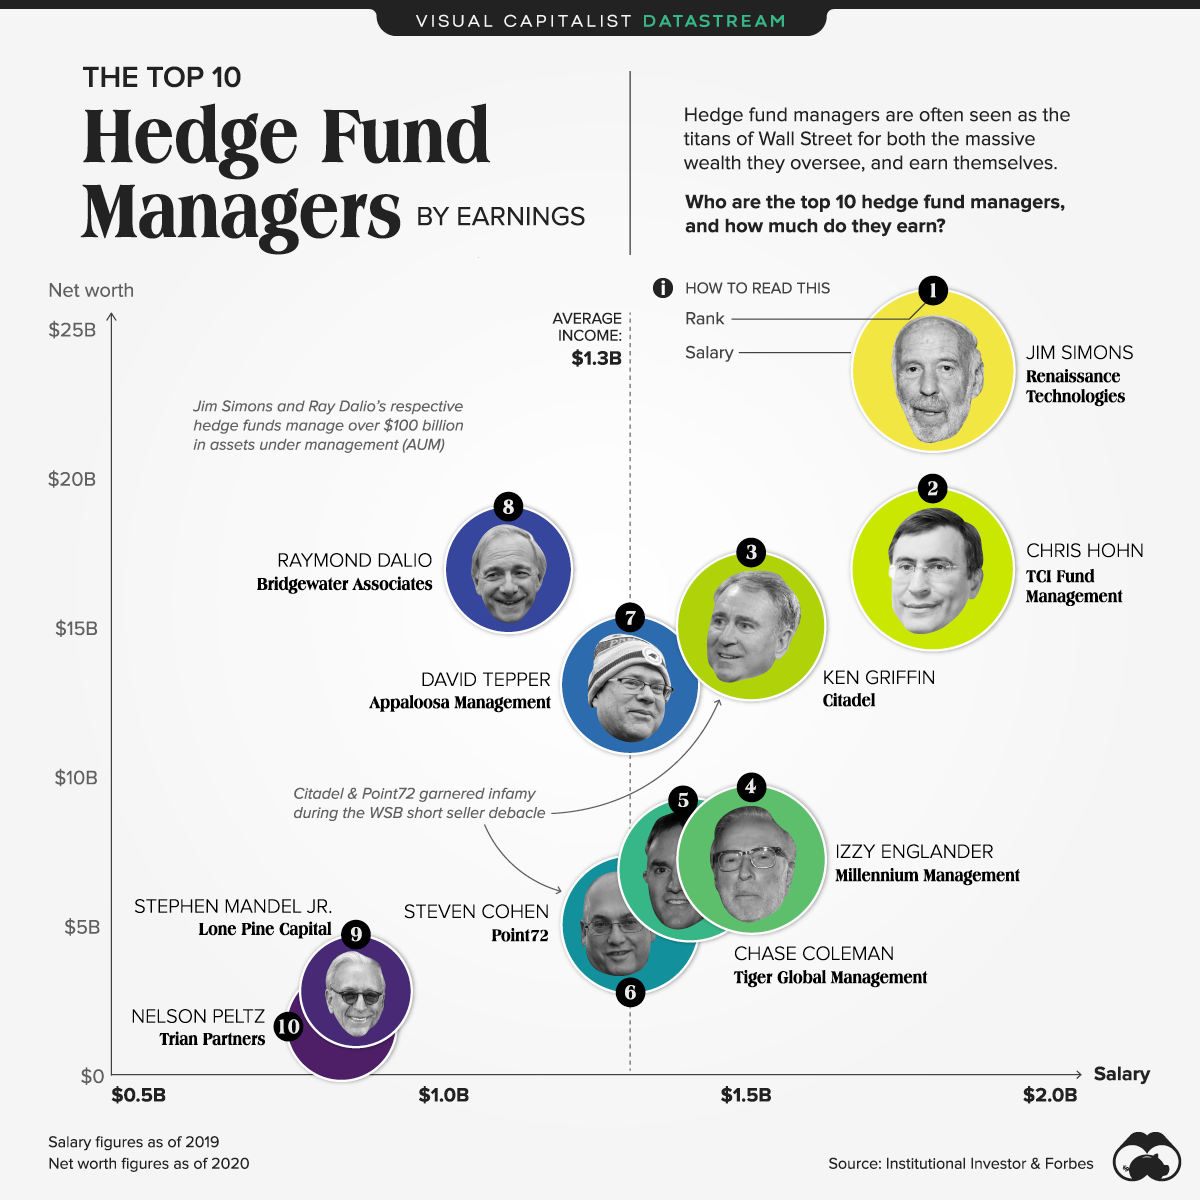 The World’s Top 10 Hedge Fund Managers by Earnings